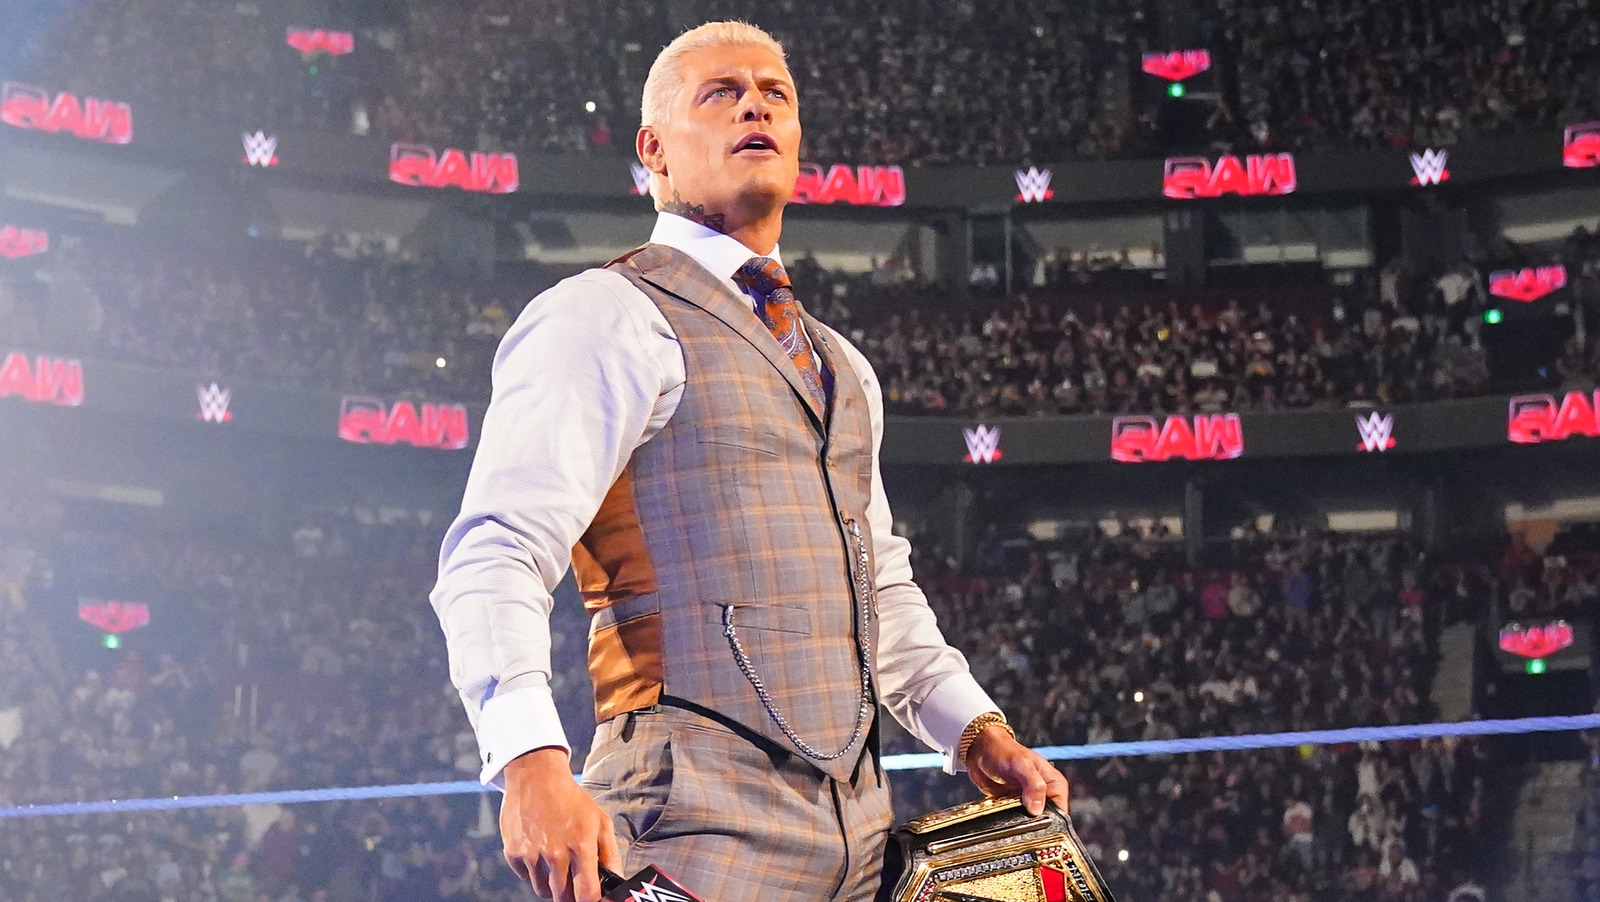 WWE Champ Cody Rhodes Discusses His Approach To The 'Wrestling Space'